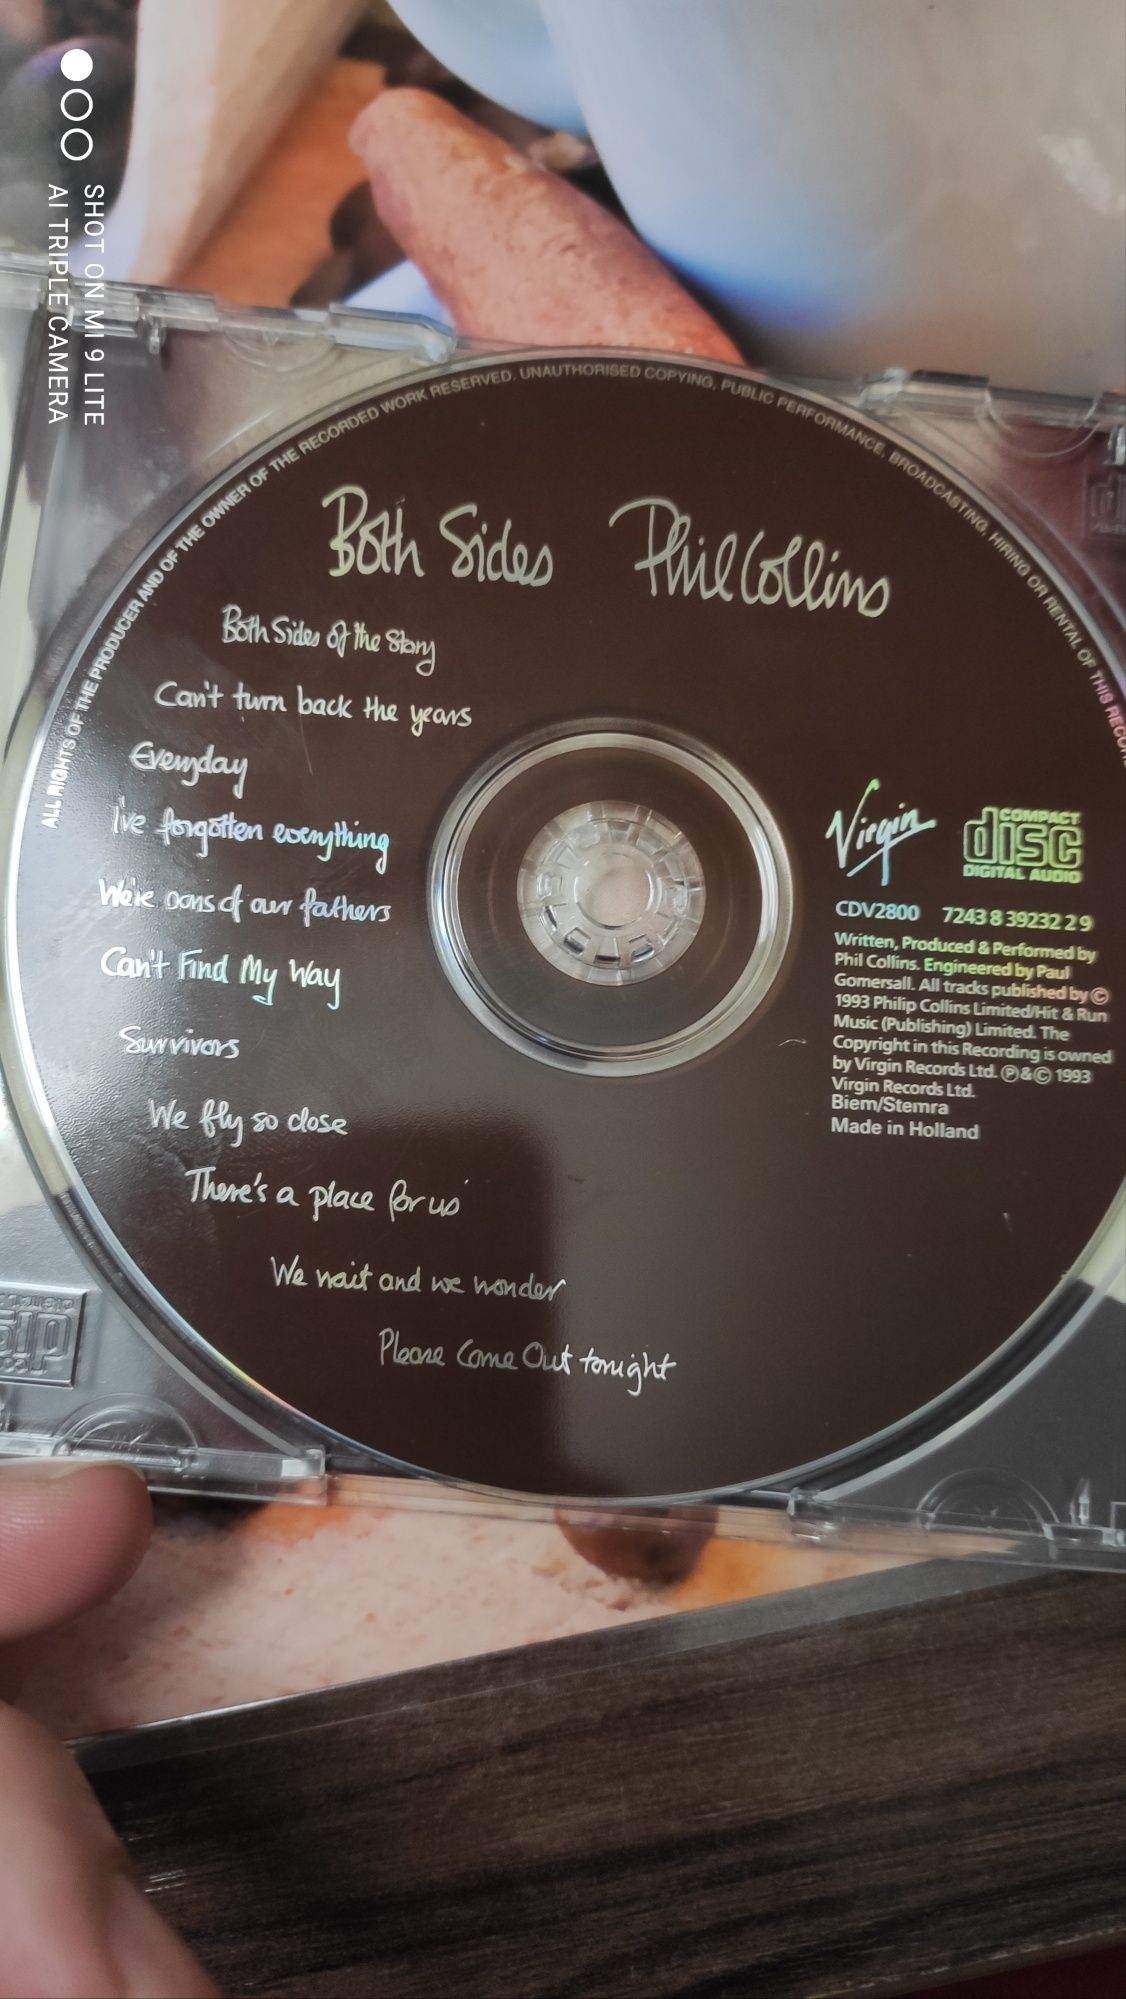 Phil Collins "Both sides" 1993